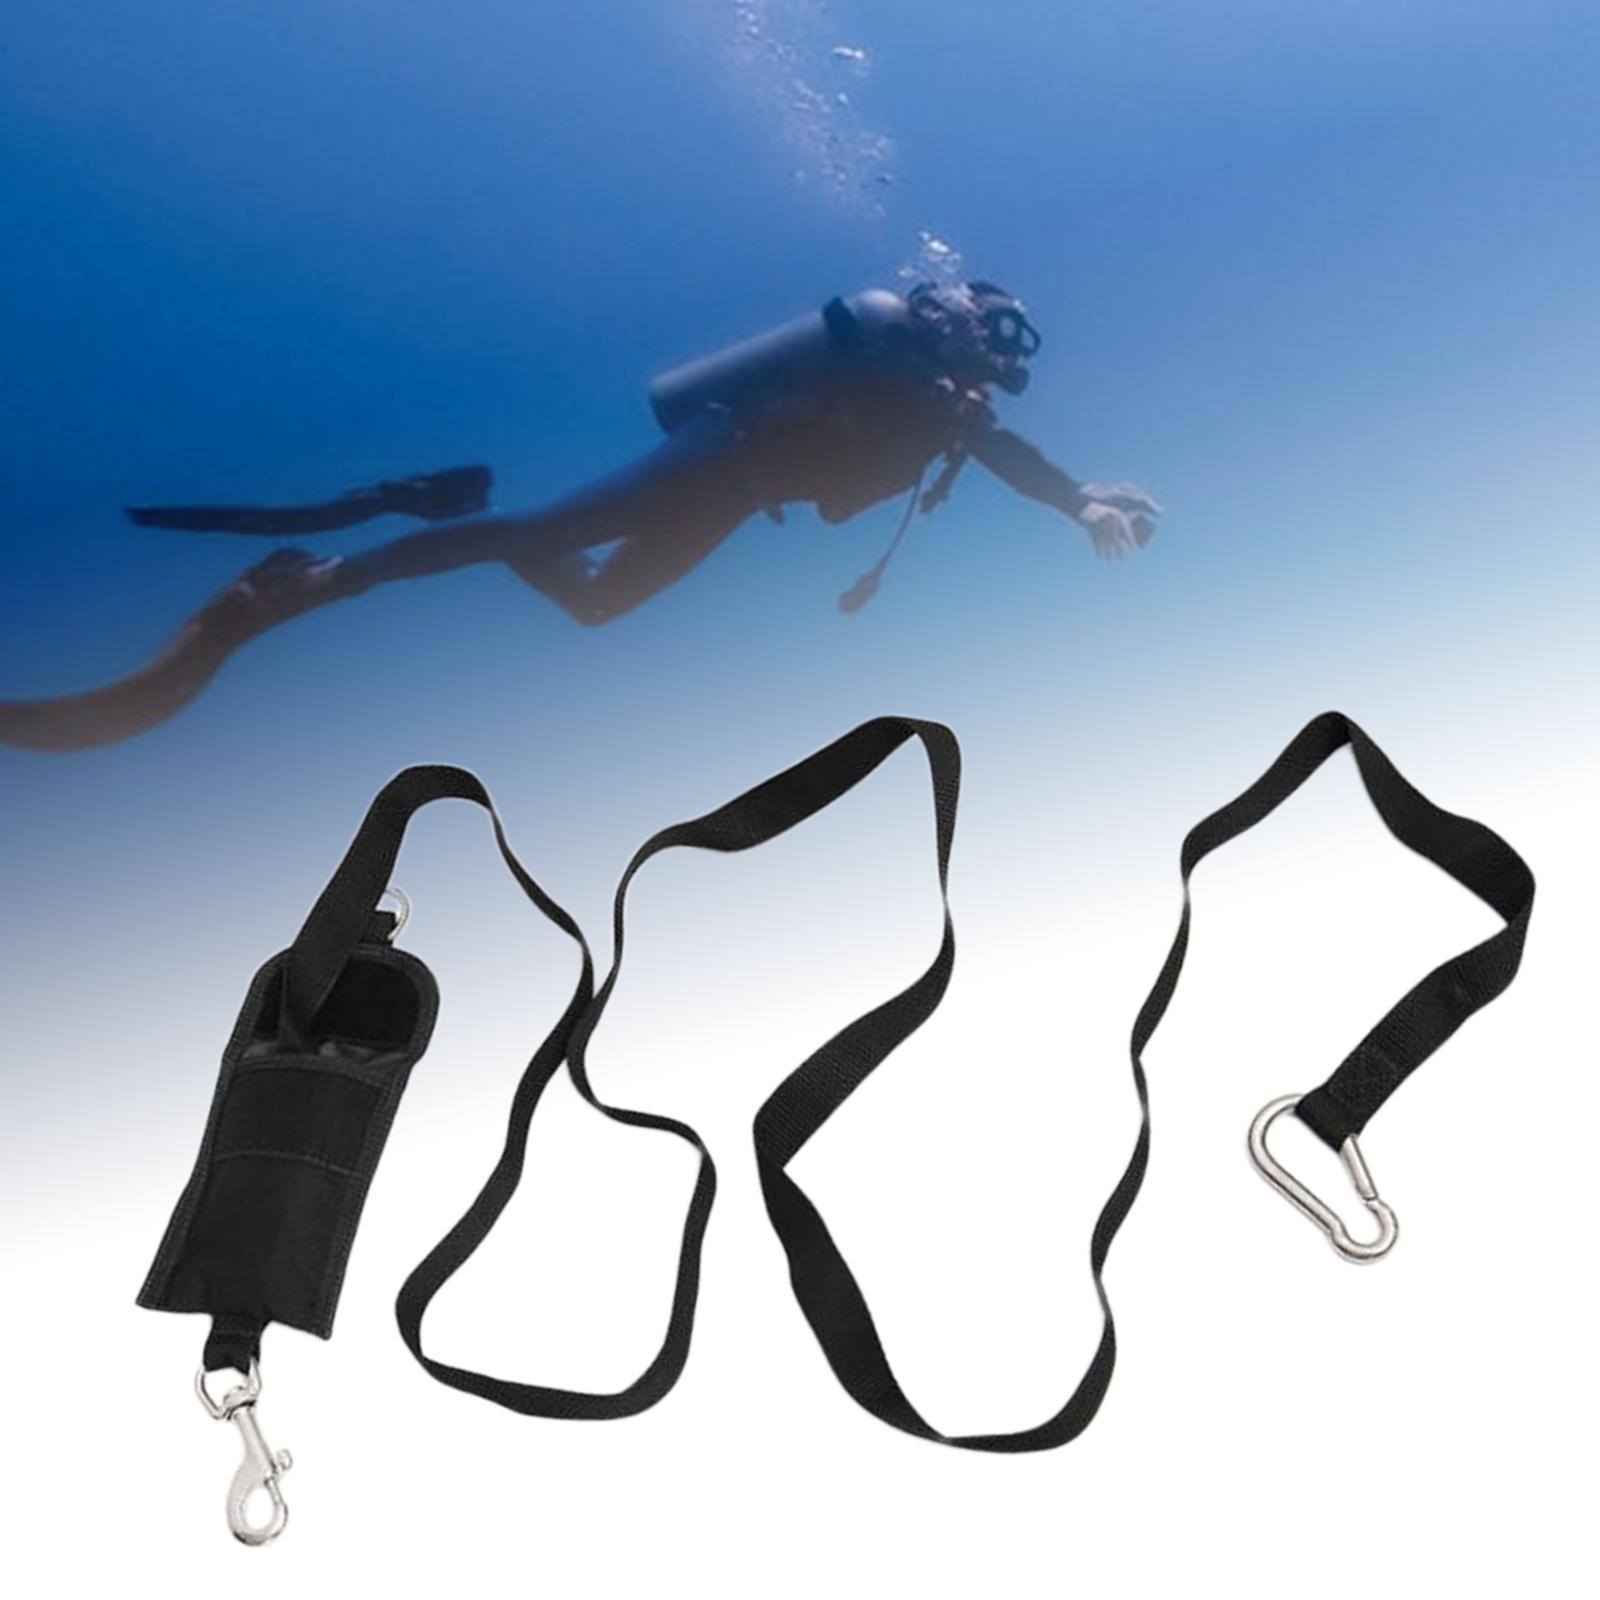 Diving Throw Bag with Swivel Snap Clips Underwater Freediving Anti-Lost